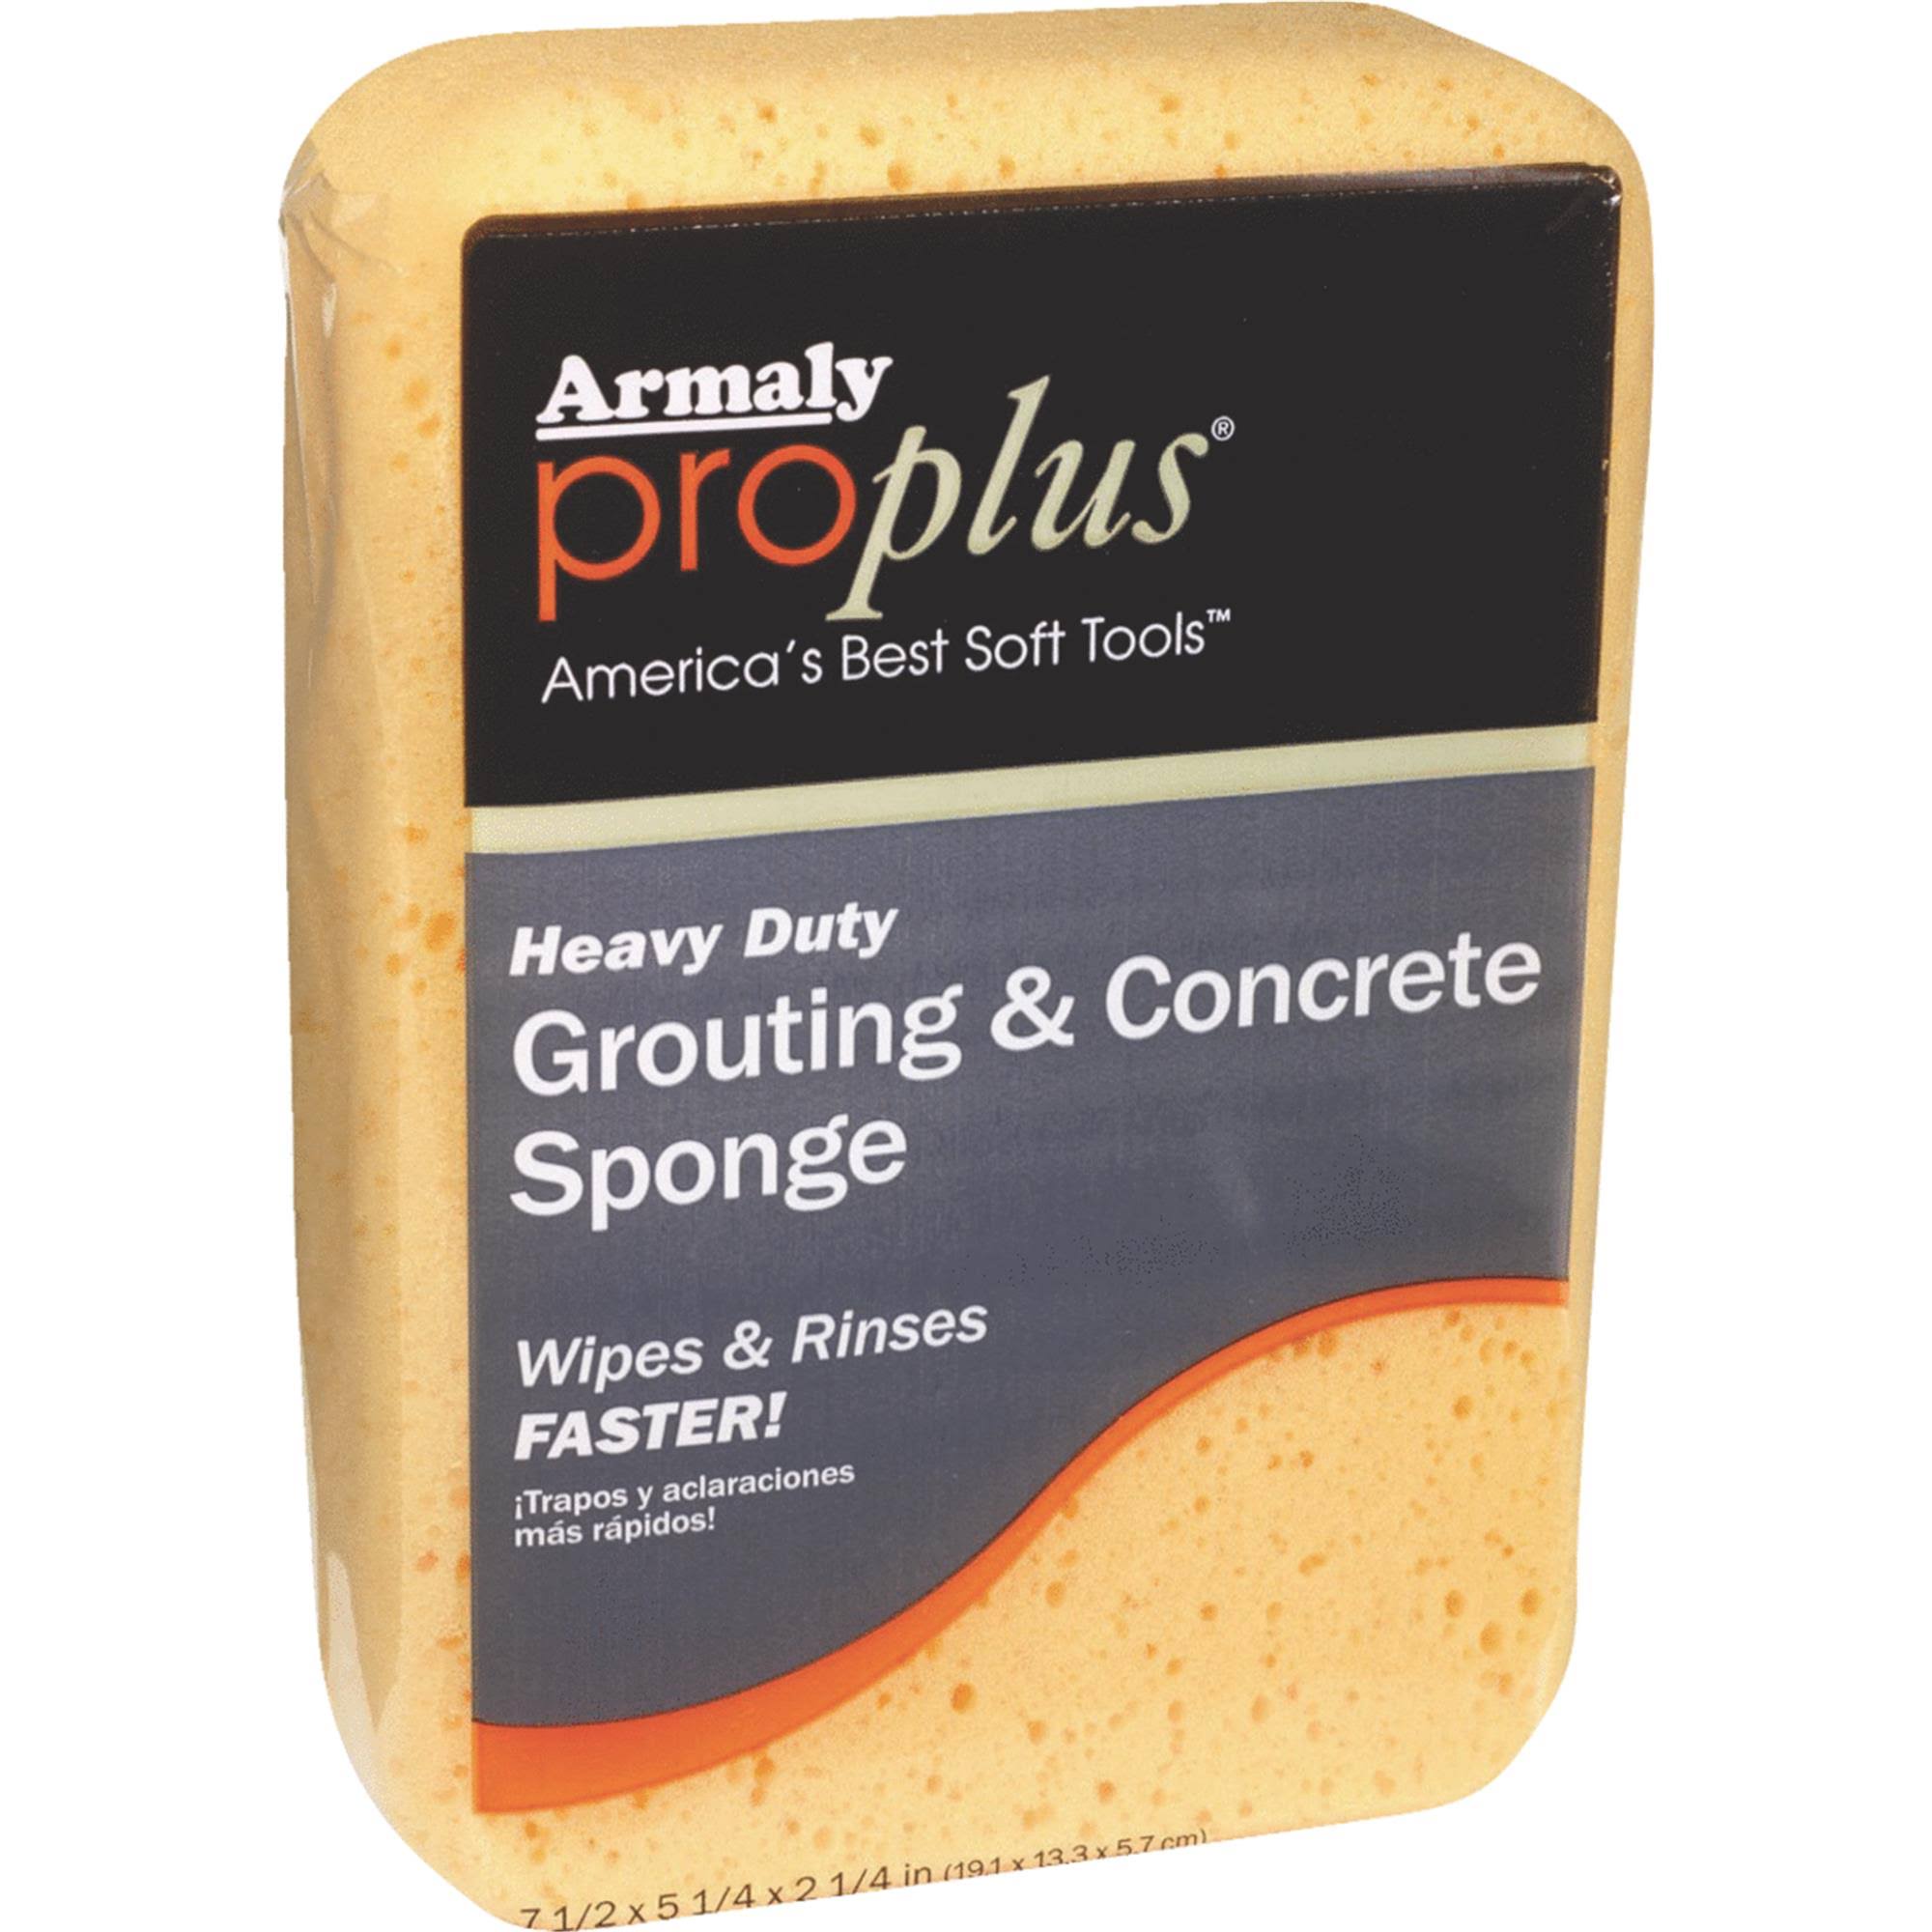 Armaly Proplus Sanded Grouting And Concrete Sponge